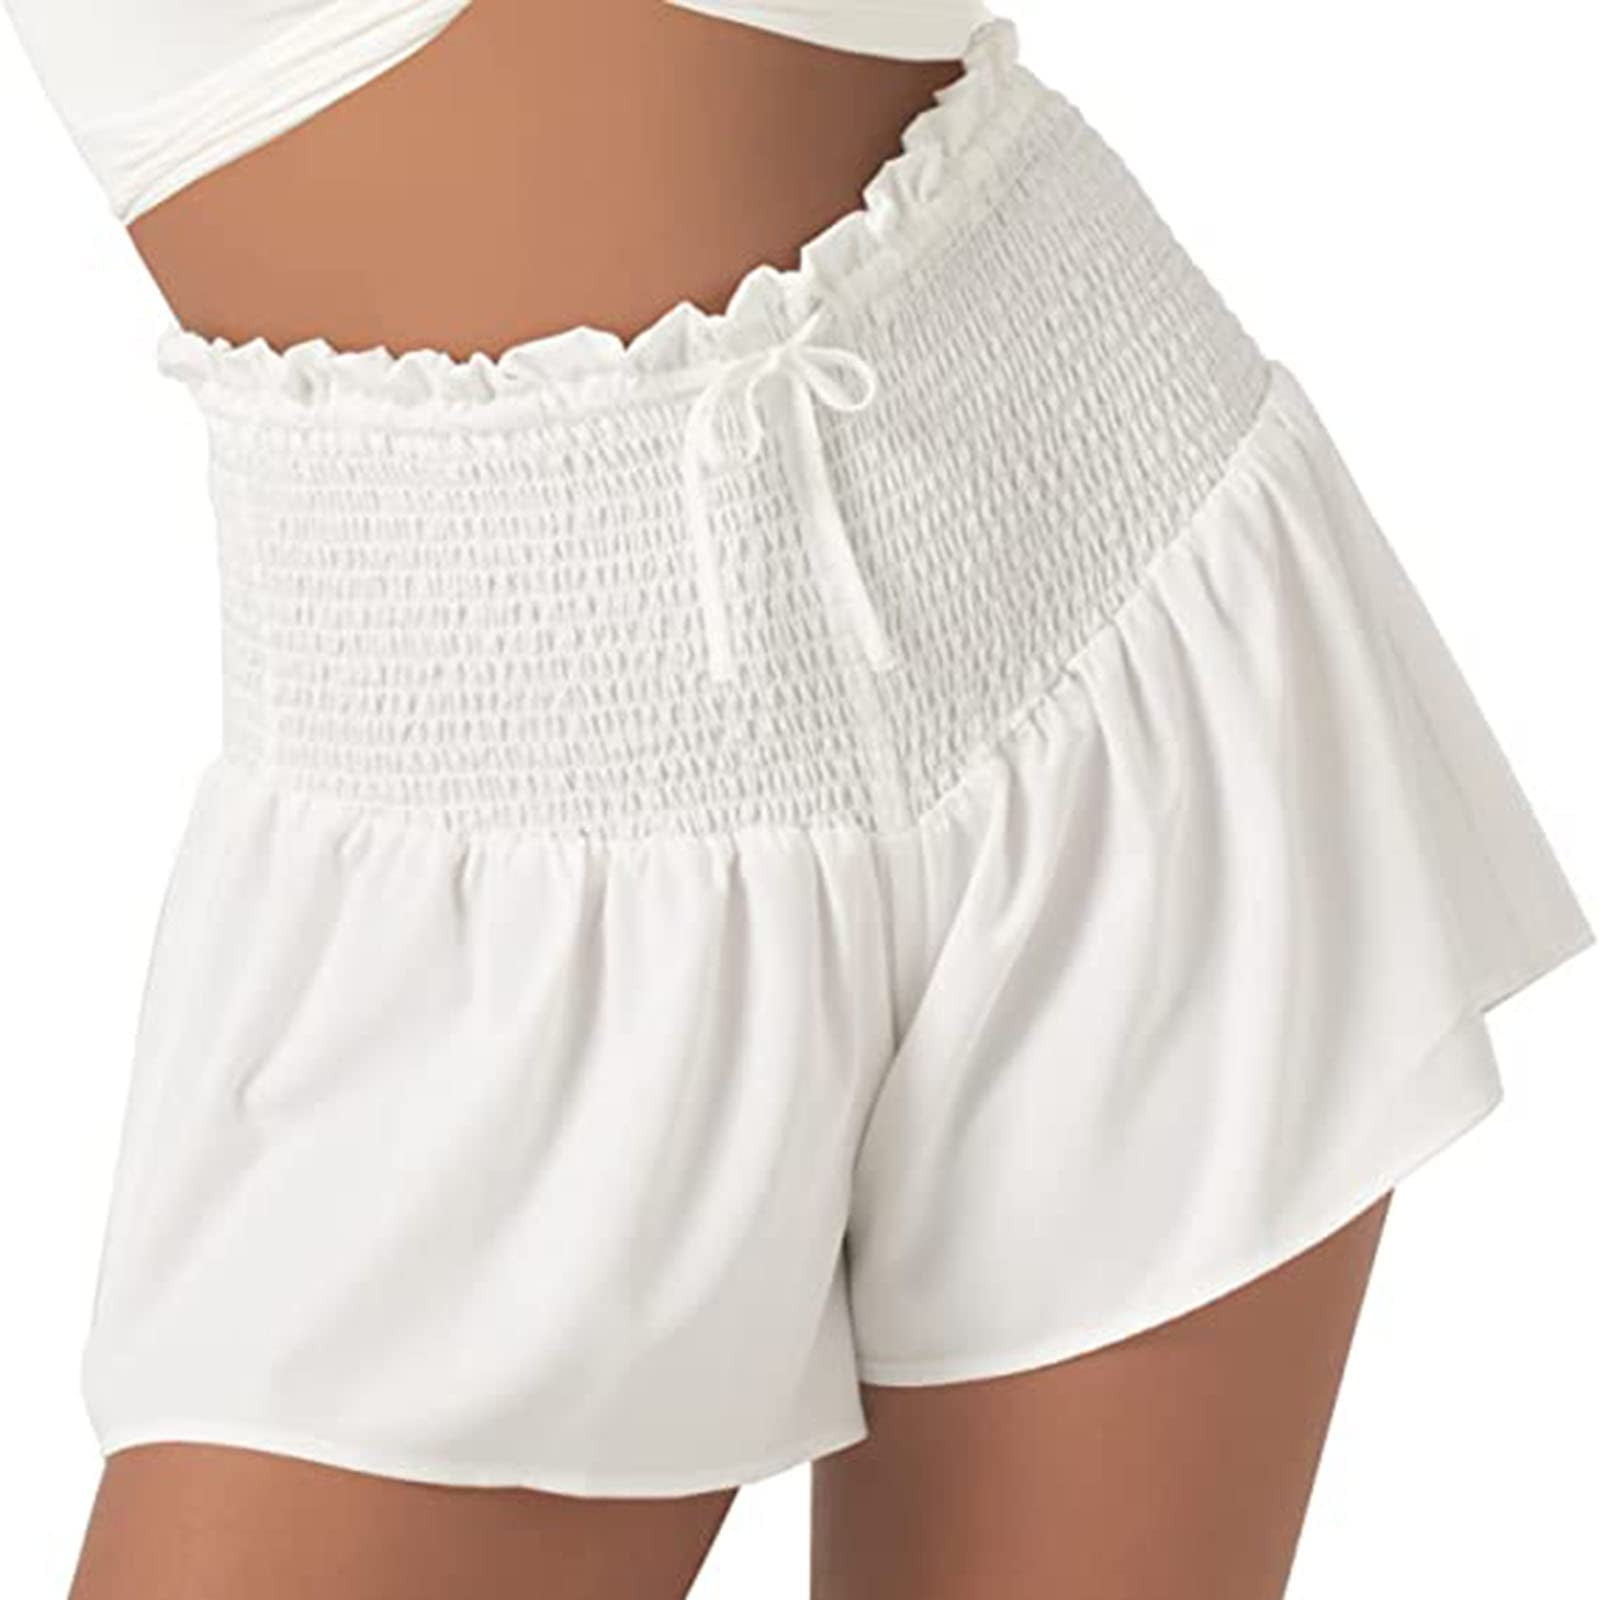 Hot Sales! Womens Shorts, Preppy Clothes, Aesthetic Clothes for